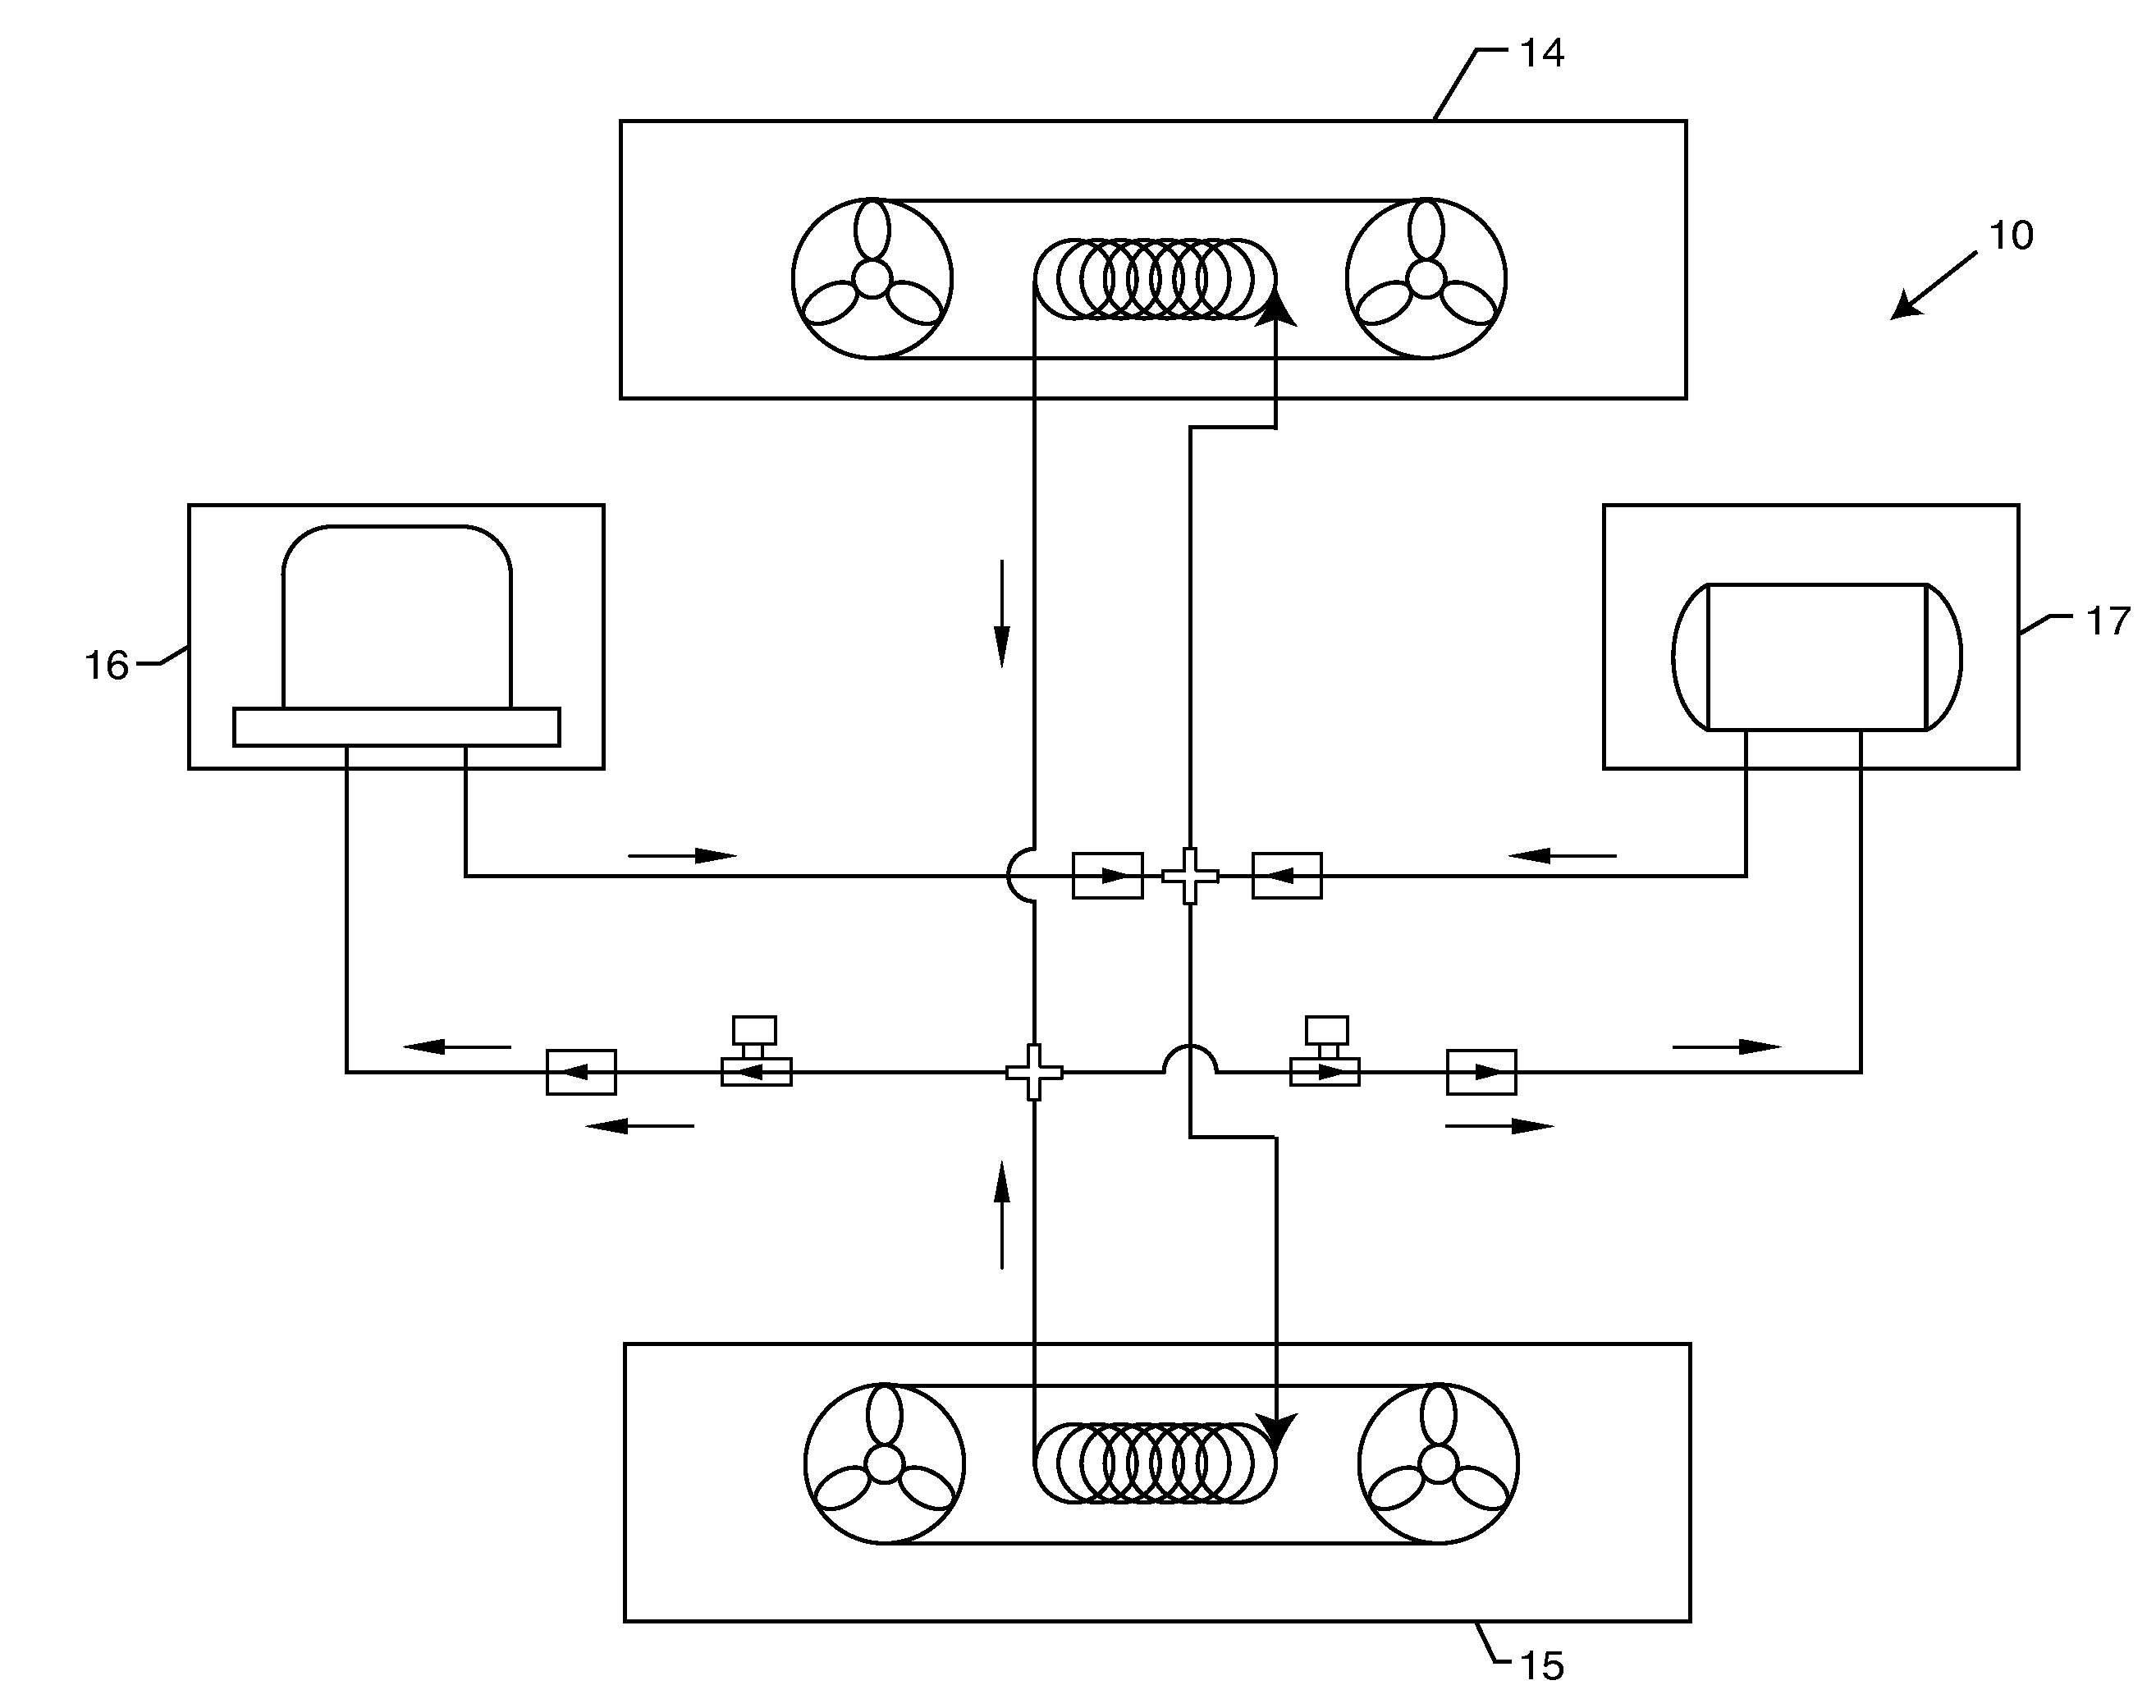 System and method for automatic control of catering truck refrigeration